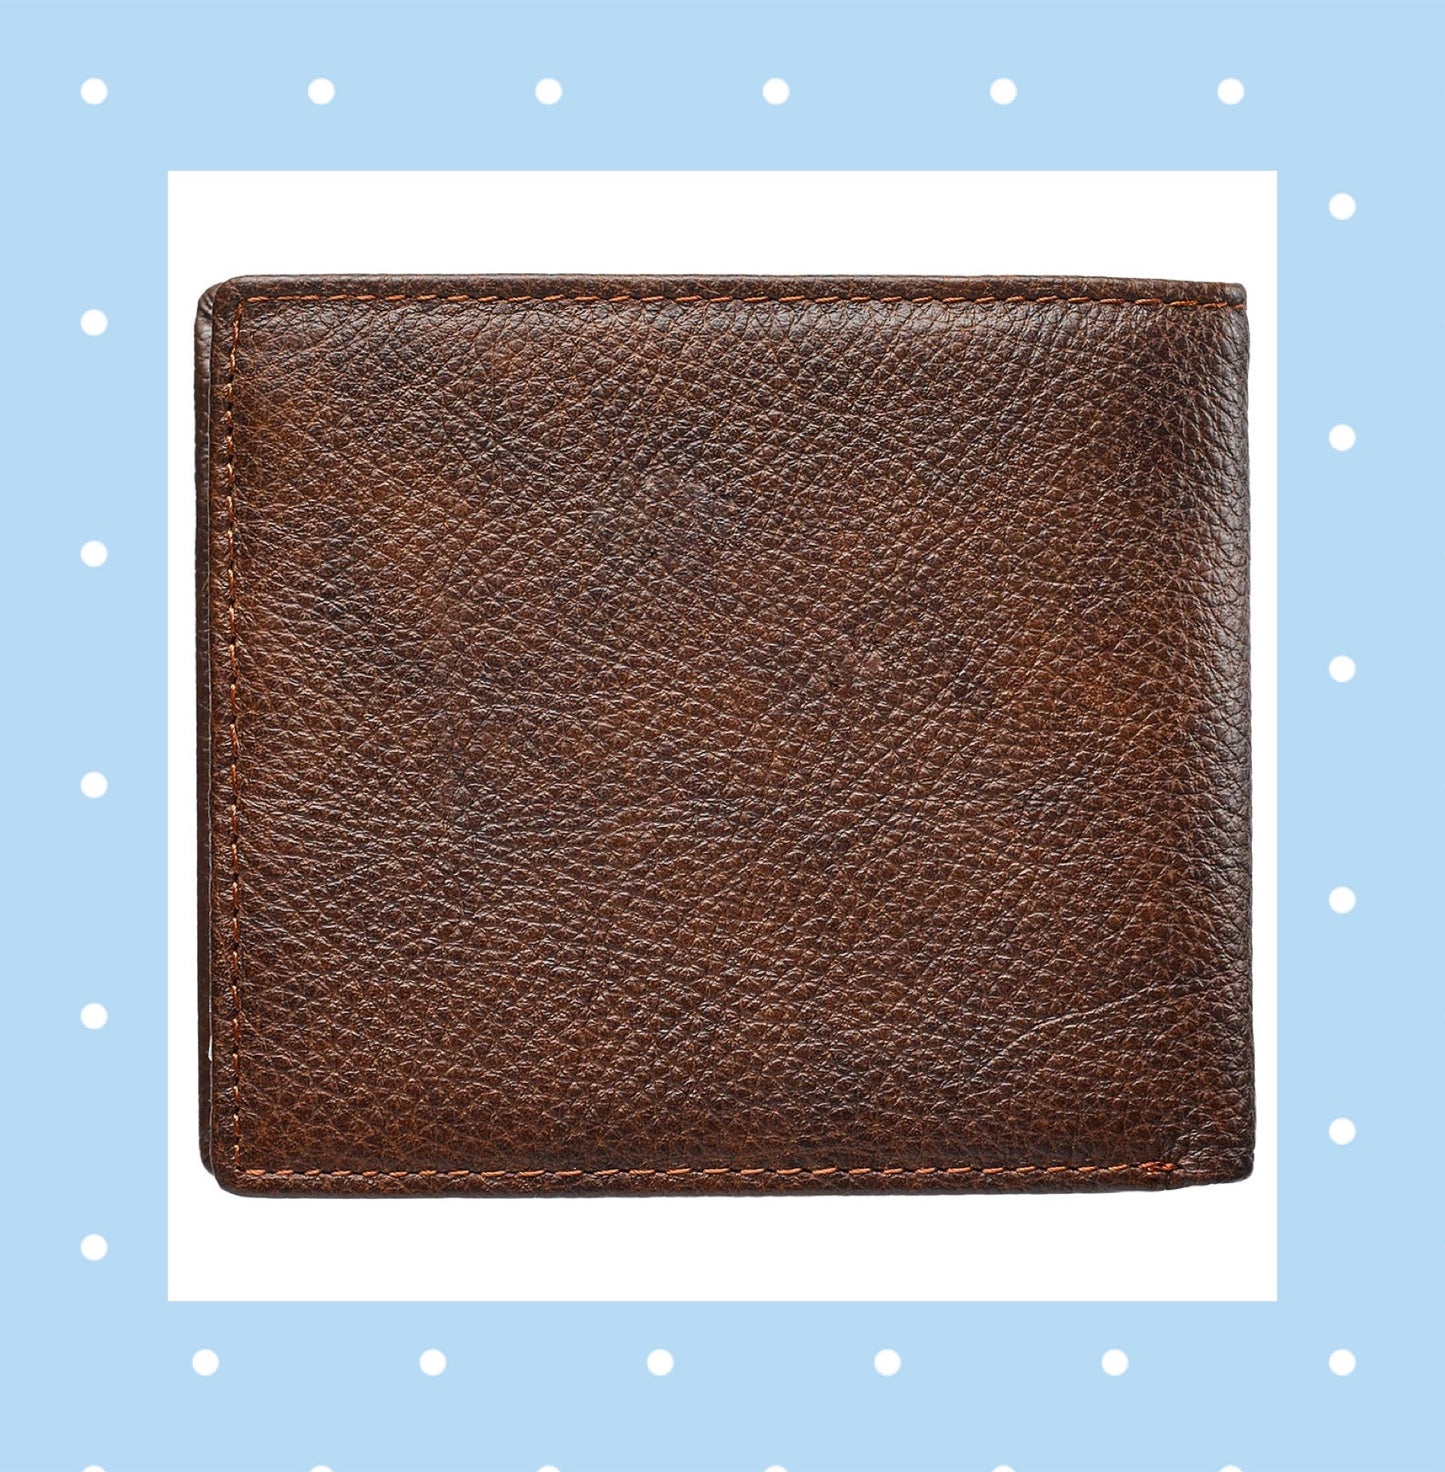 Strong and Courageous Two-tone Brown Full Grain Leather Wallet - Joshua 1:9